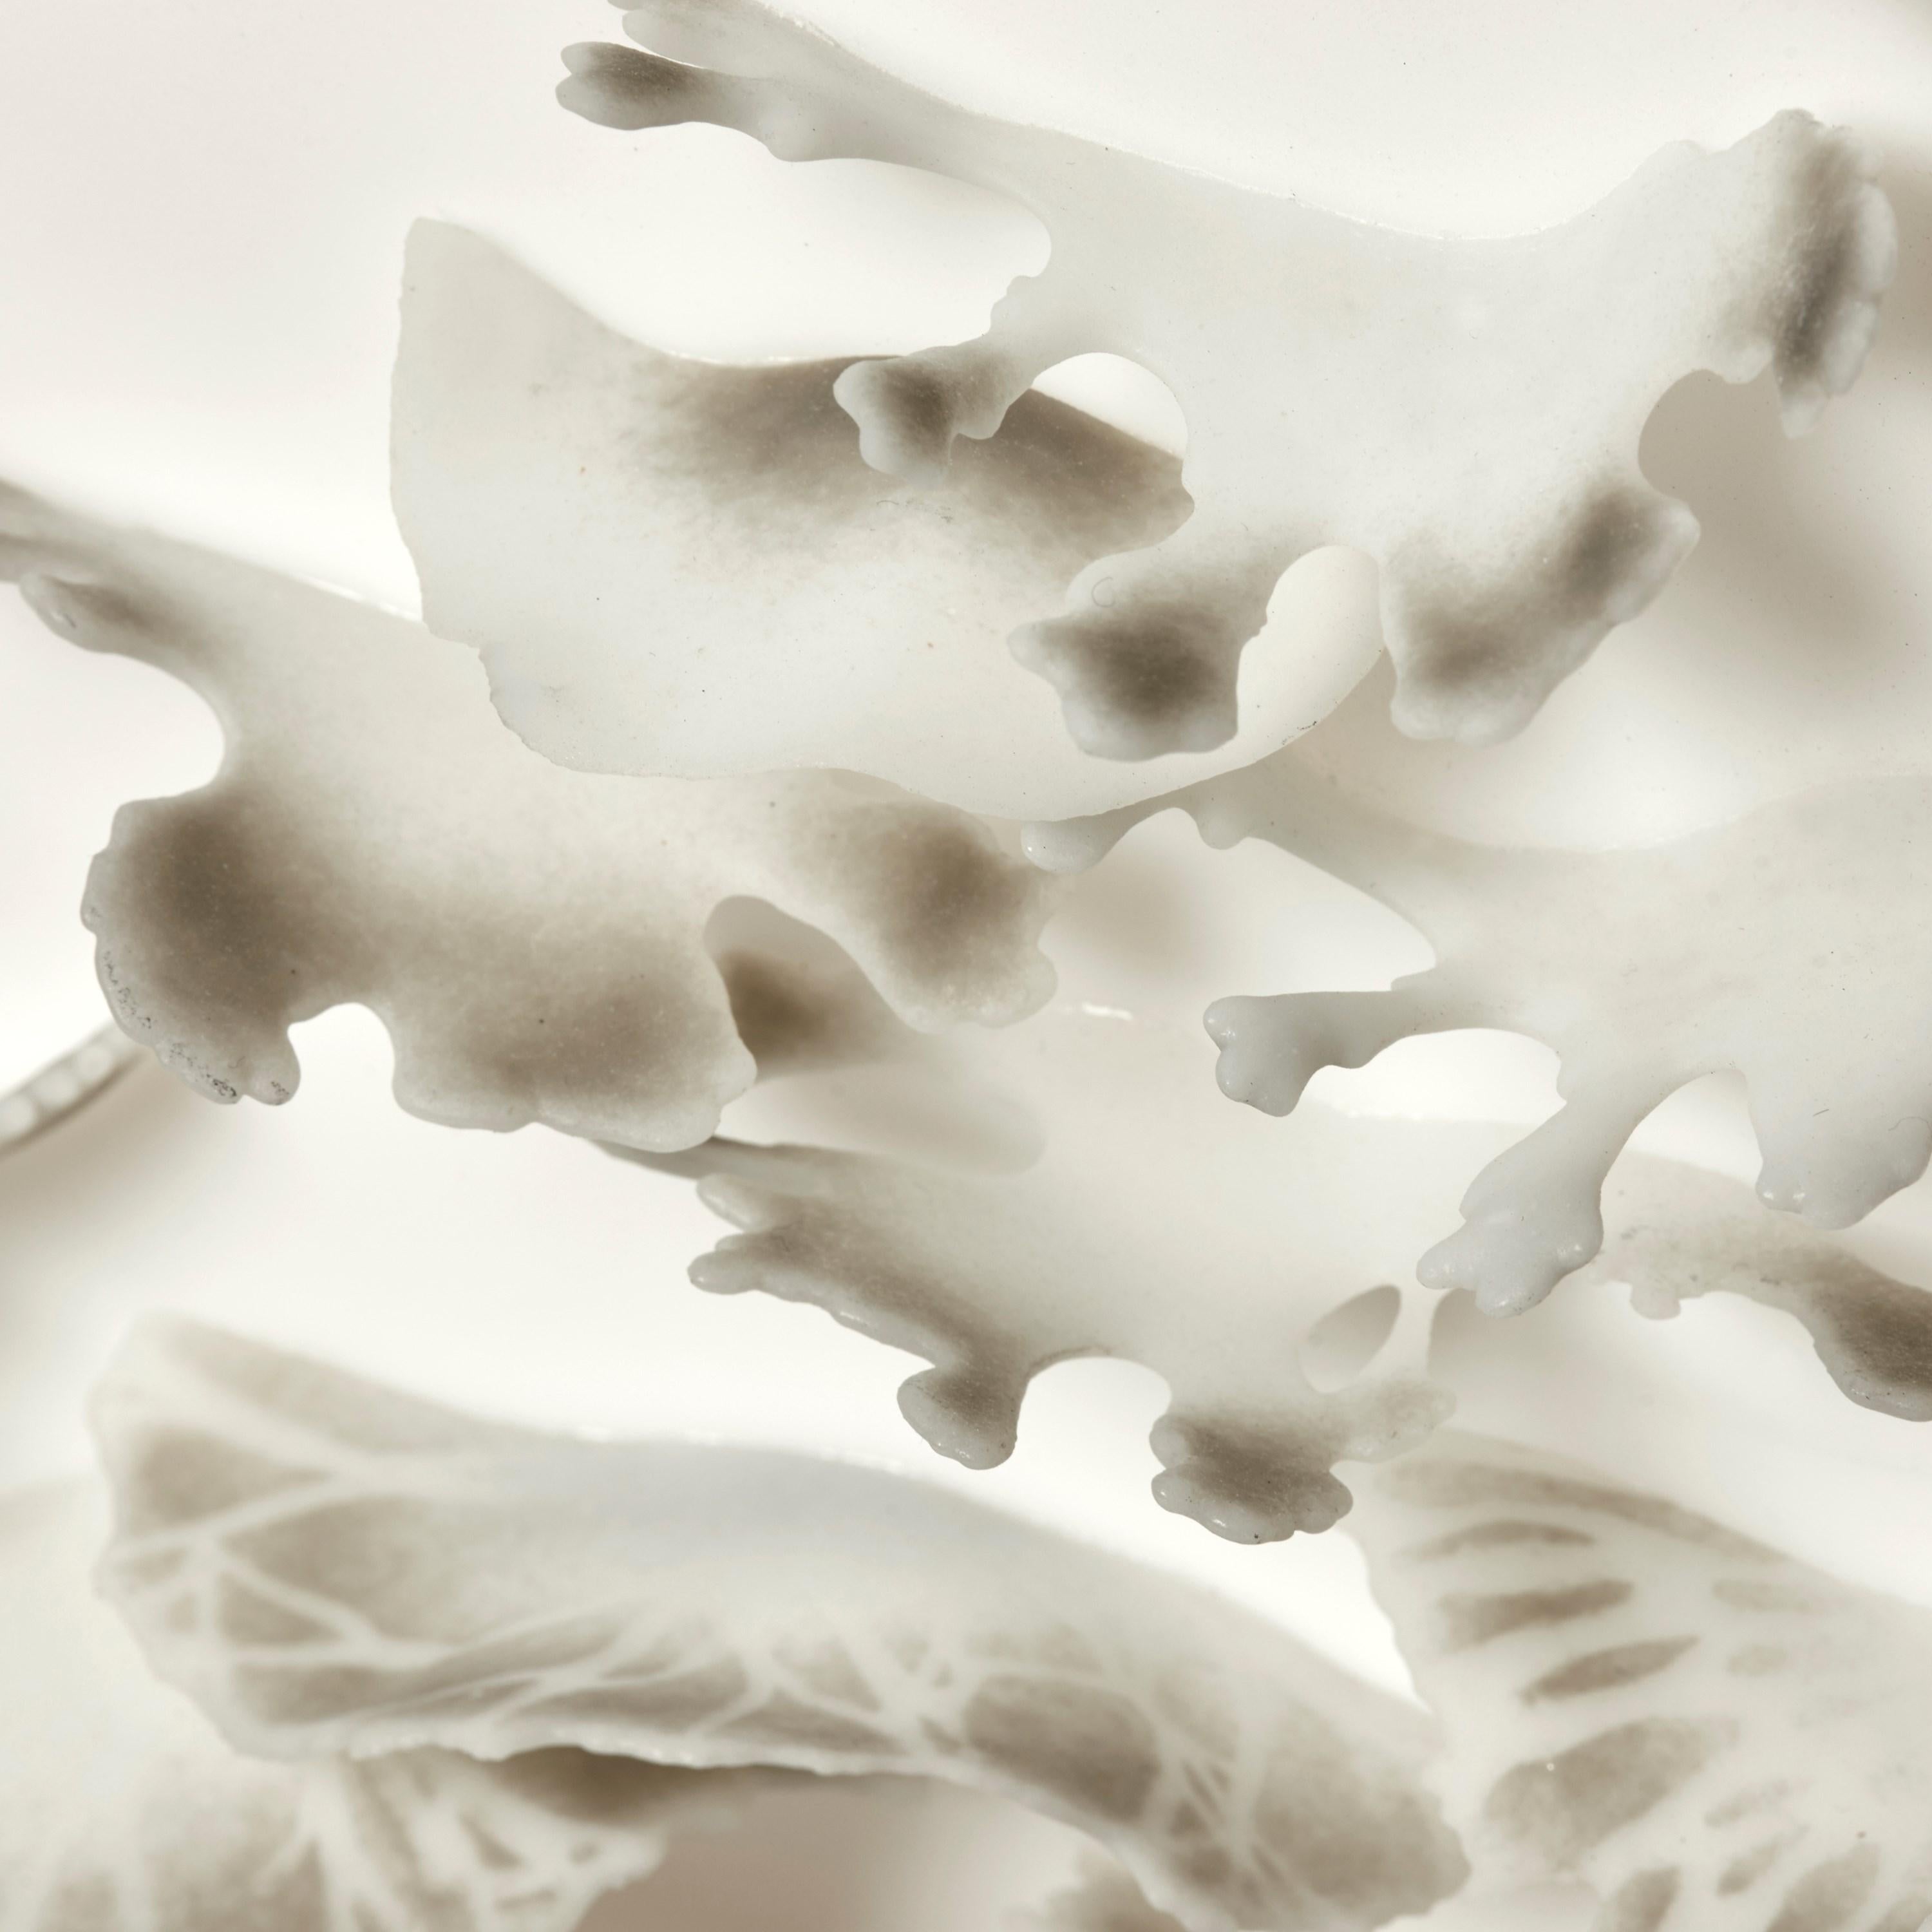 Hand-Crafted Bracket Mushrooms in Grey and White, a Glass Sculptural Plate by Verity Pulford For Sale